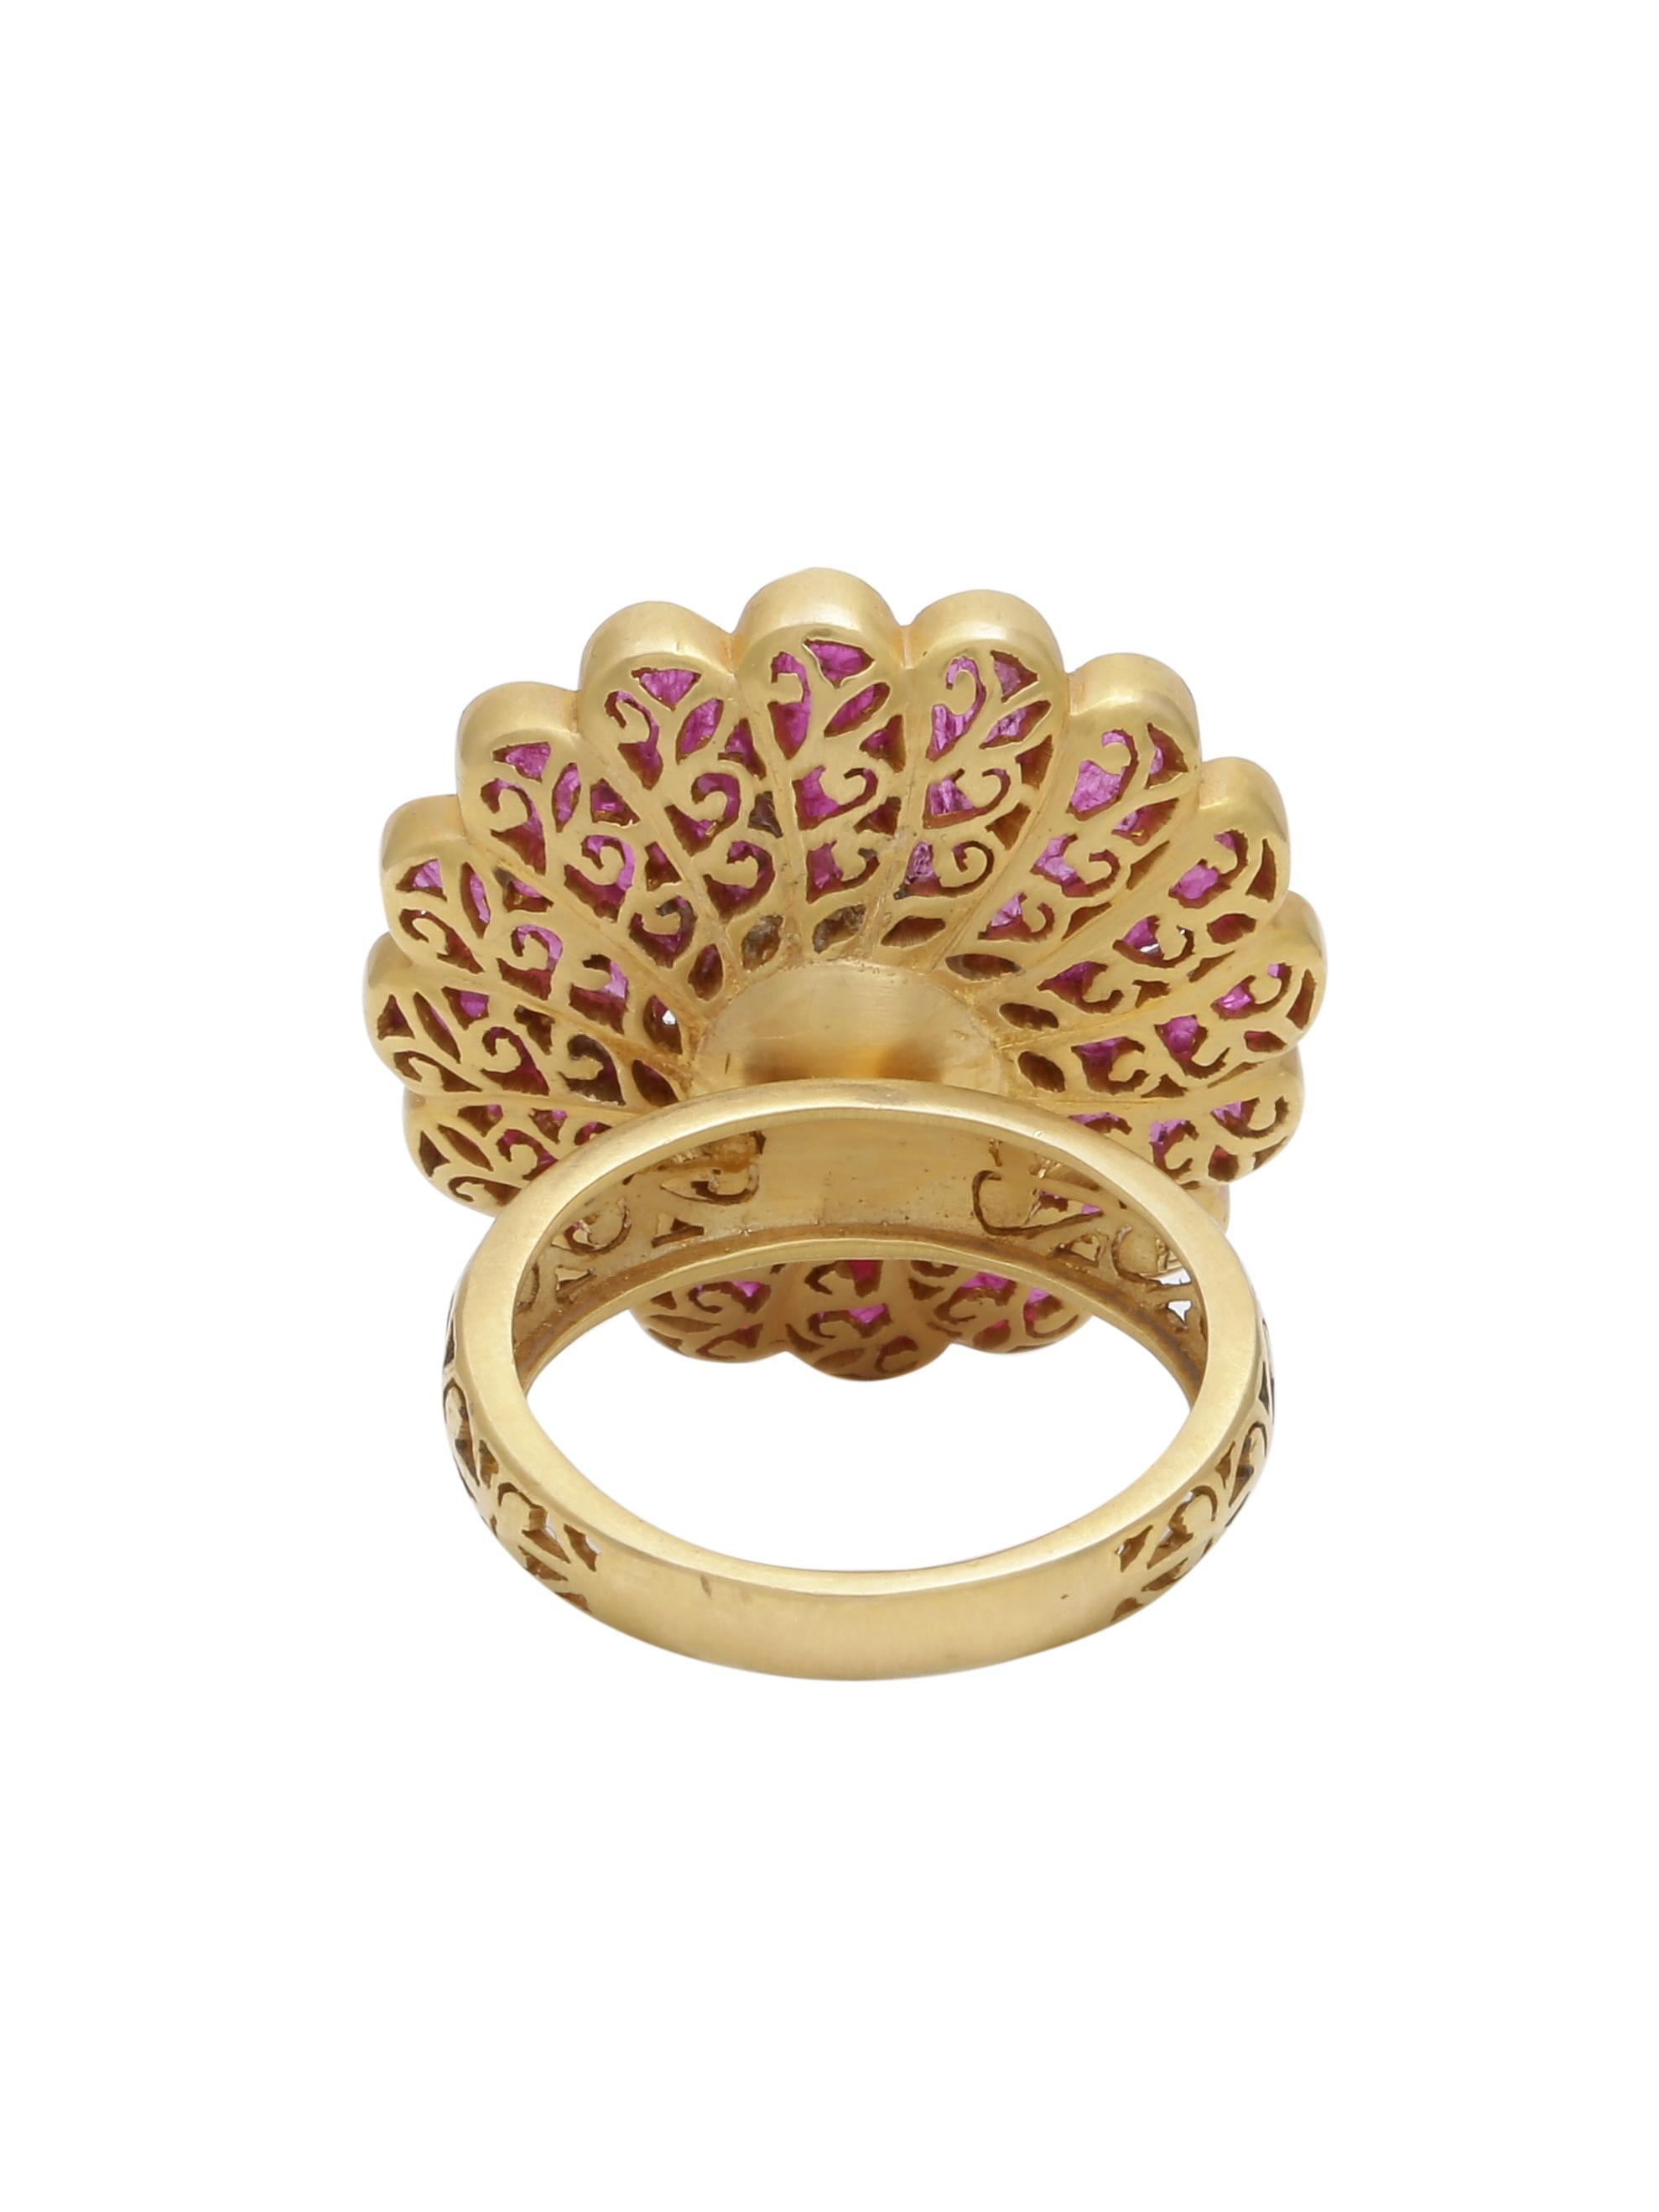 A handcrafted Ruby ring with a Rosecut diamond in the centre made in 18K Yellow Gold.
The band and the back of the ring you will notice intricate hand work done on gold that compliments the beautiful top.
The Rubies are customised and  hand cut to